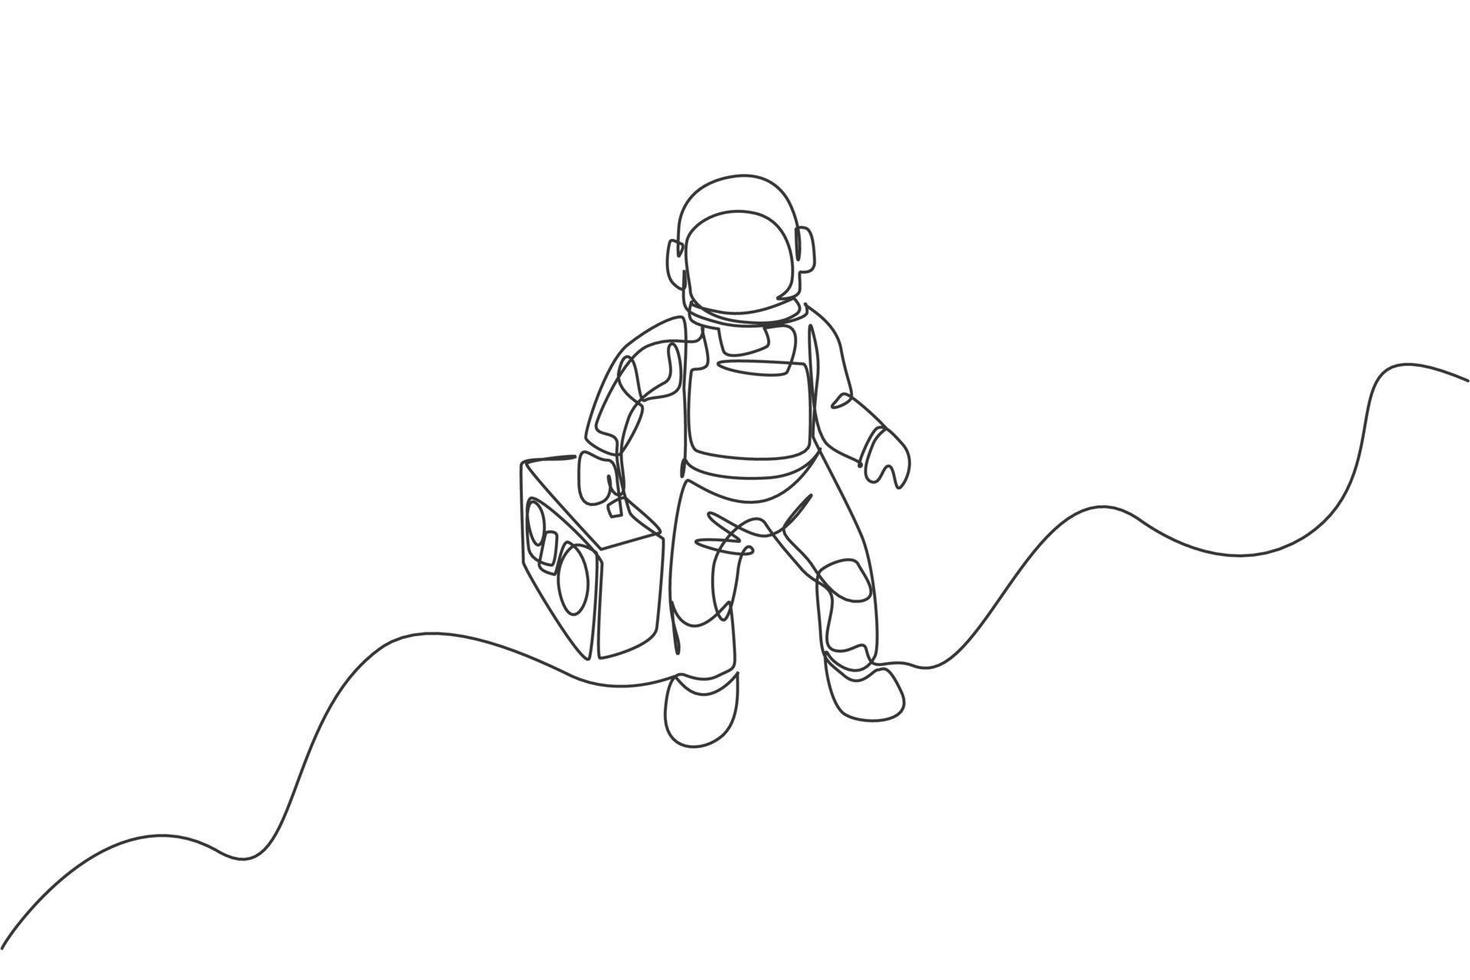 One single line drawing of spaceman flying and bringing retro radio in deep space graphic vector illustration. Music concert poster with space astronaut concept. Modern continuous line draw design